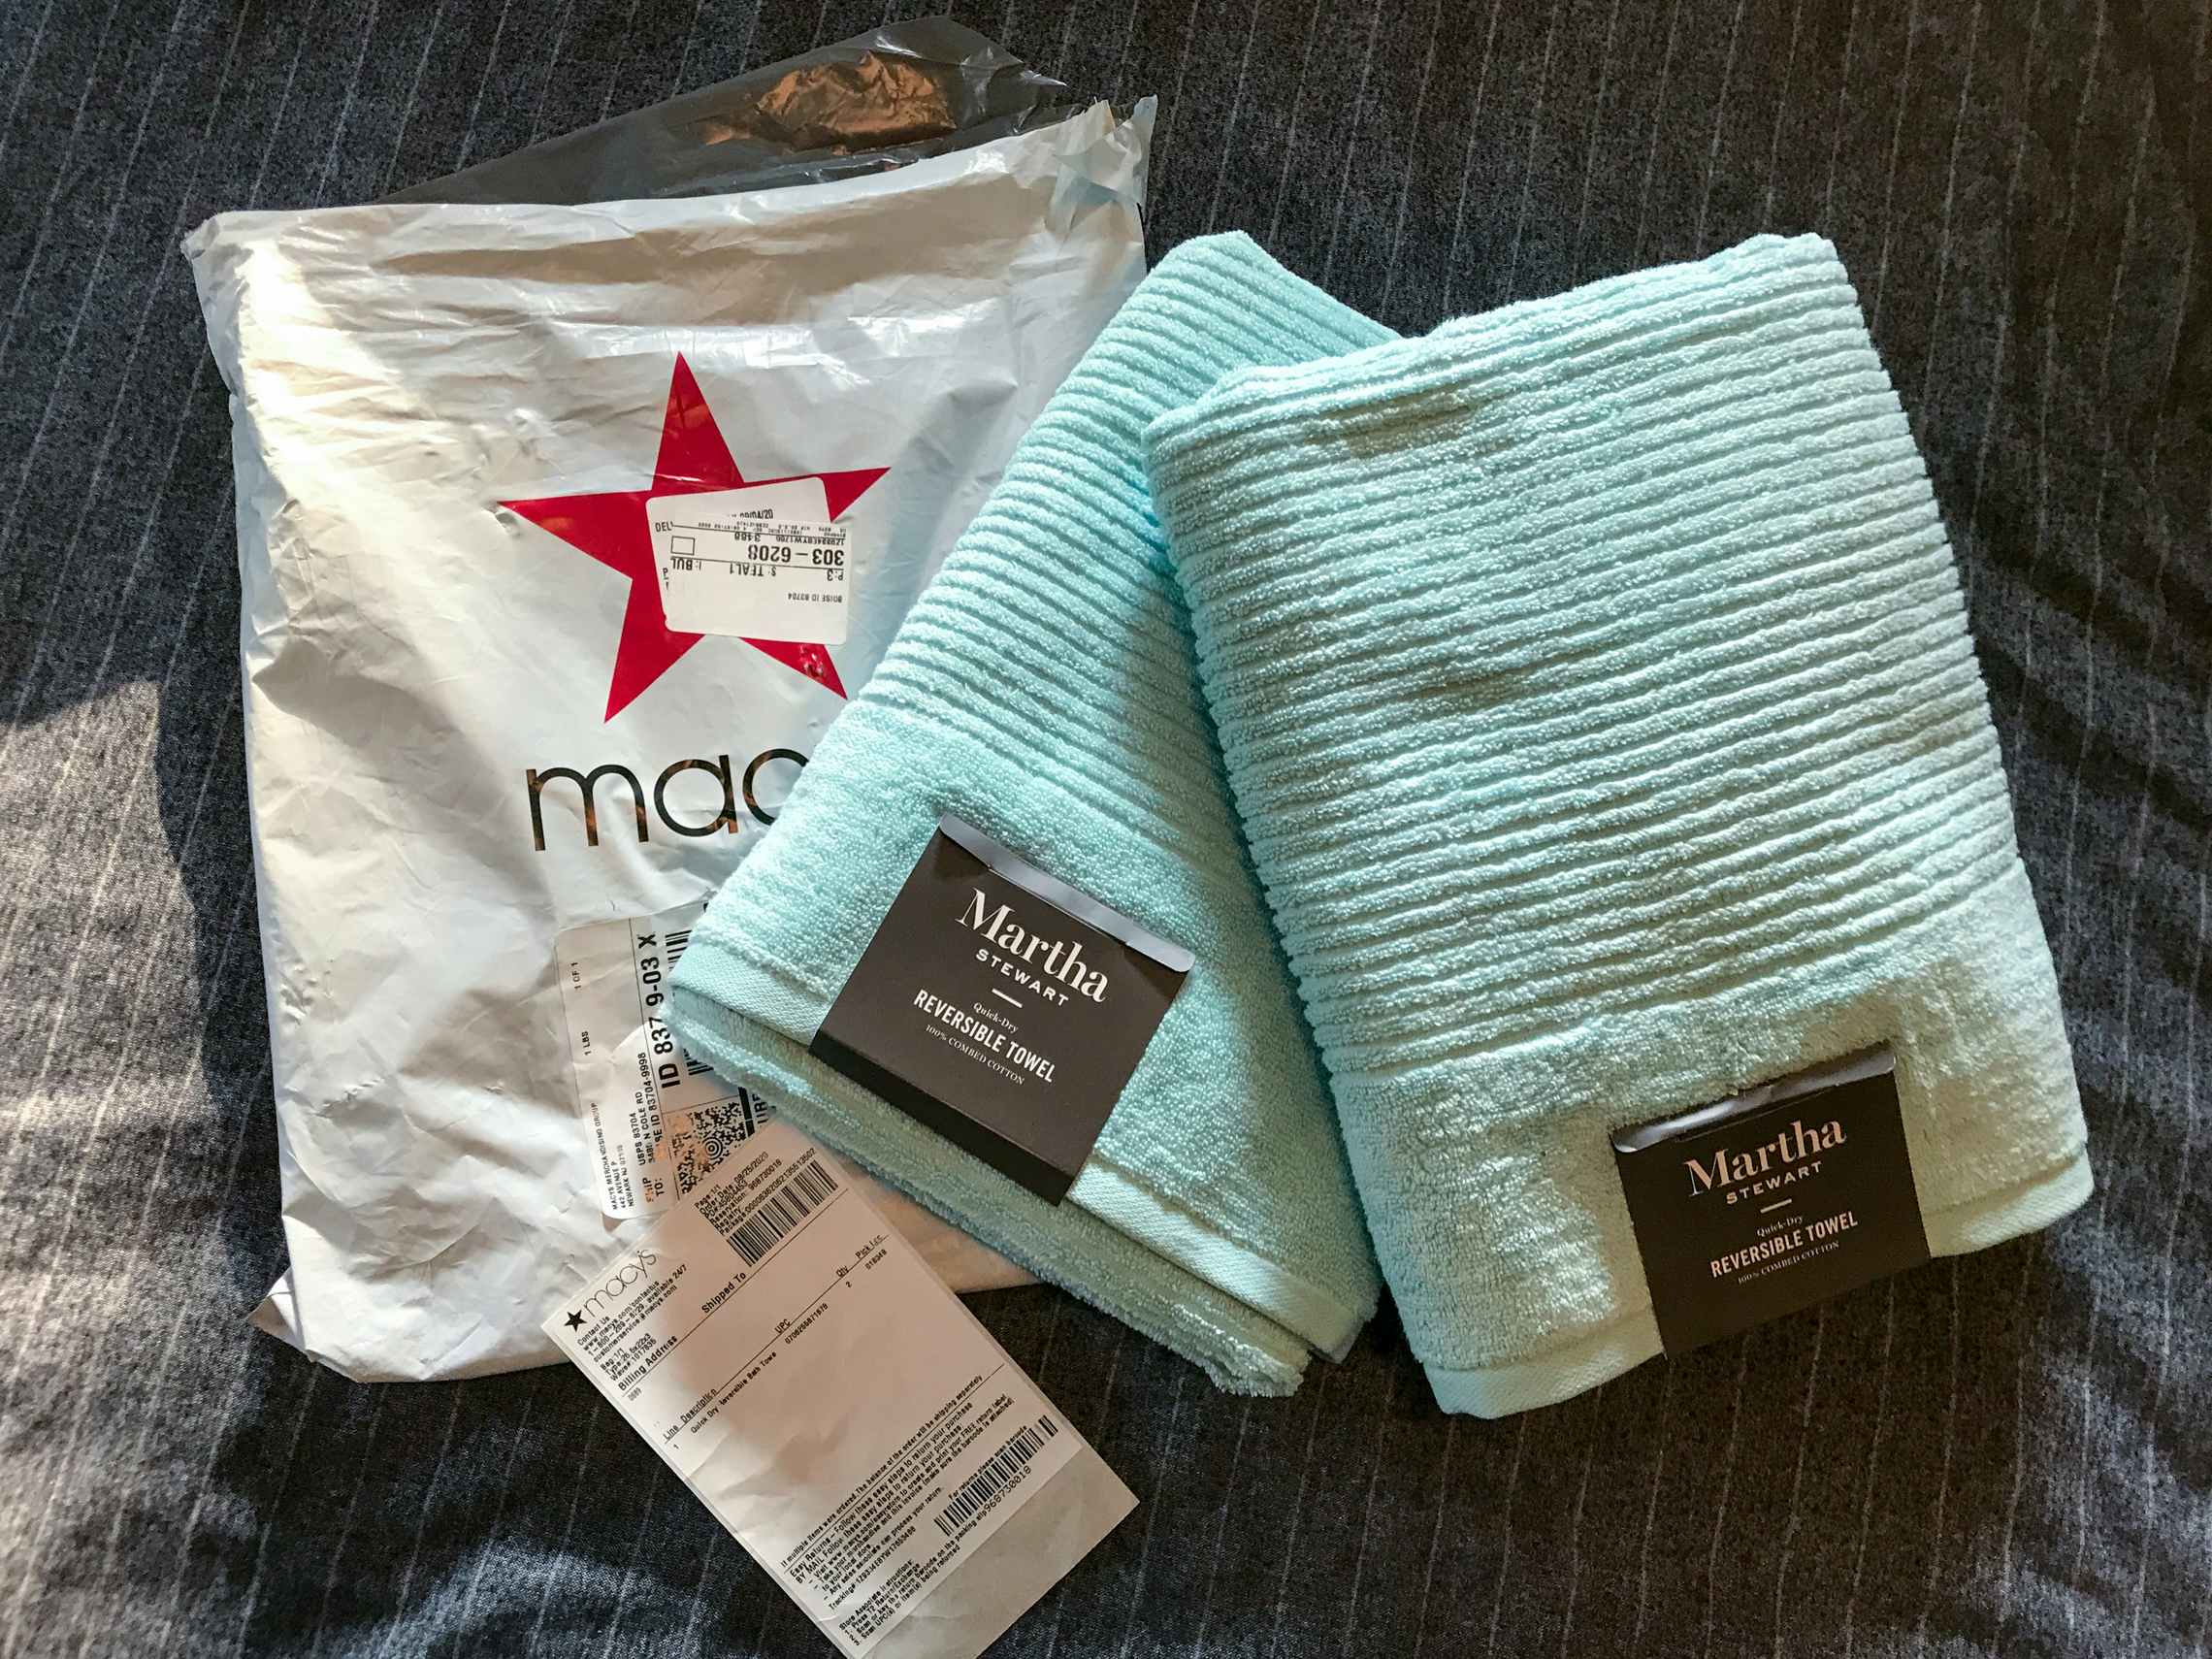 Macy's online order bag with two towels.